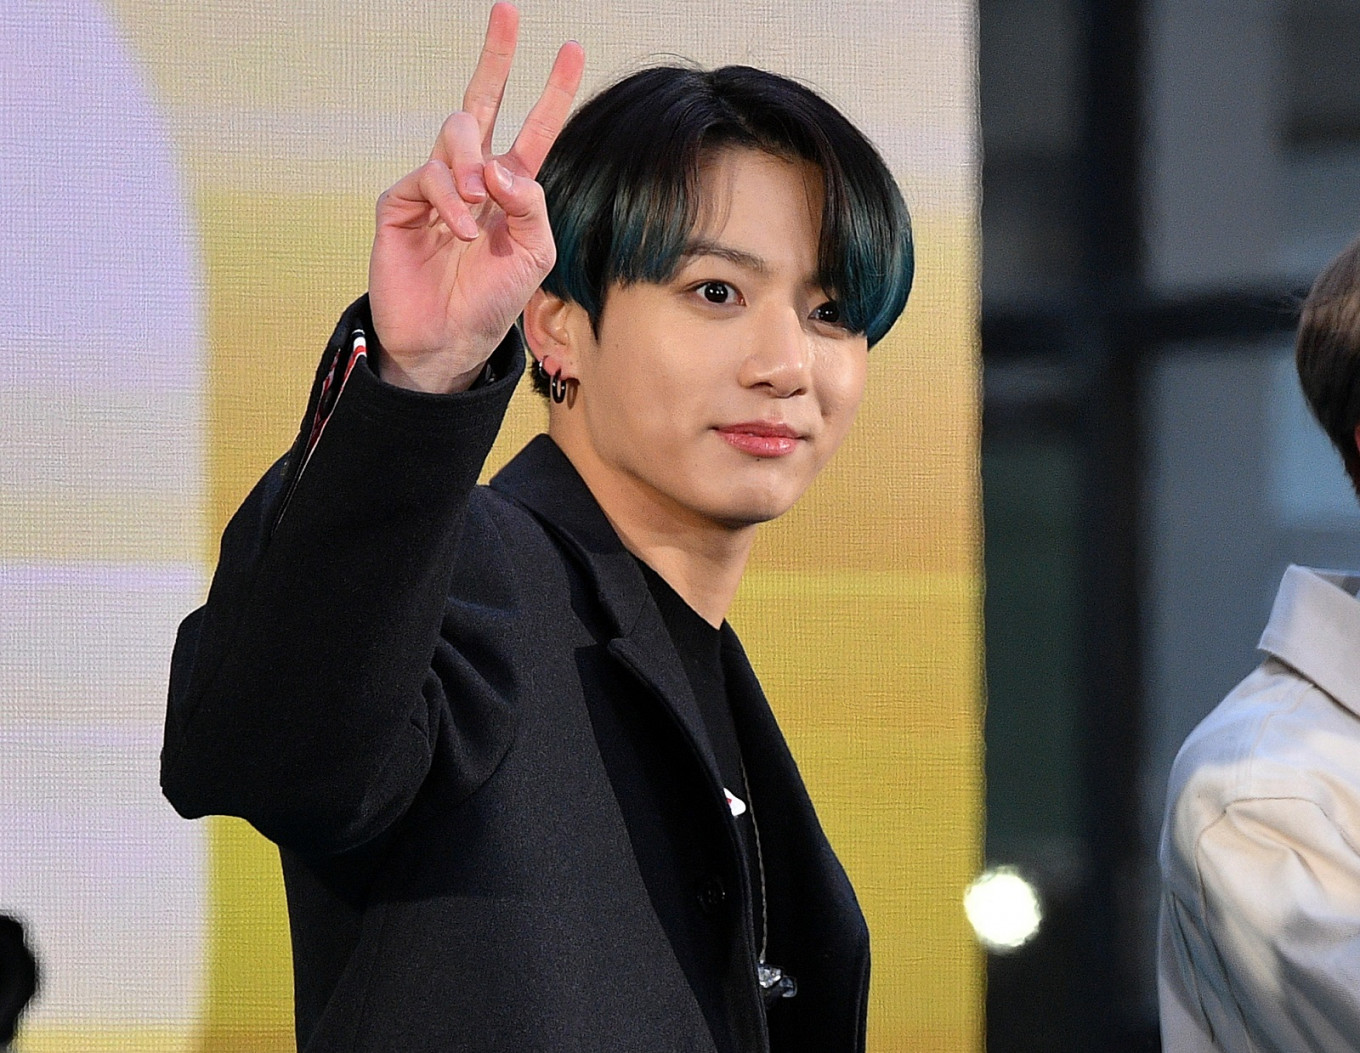 Bts Jung Kook Freezes Up During Solo Shoot Entertainment The Jakarta Post